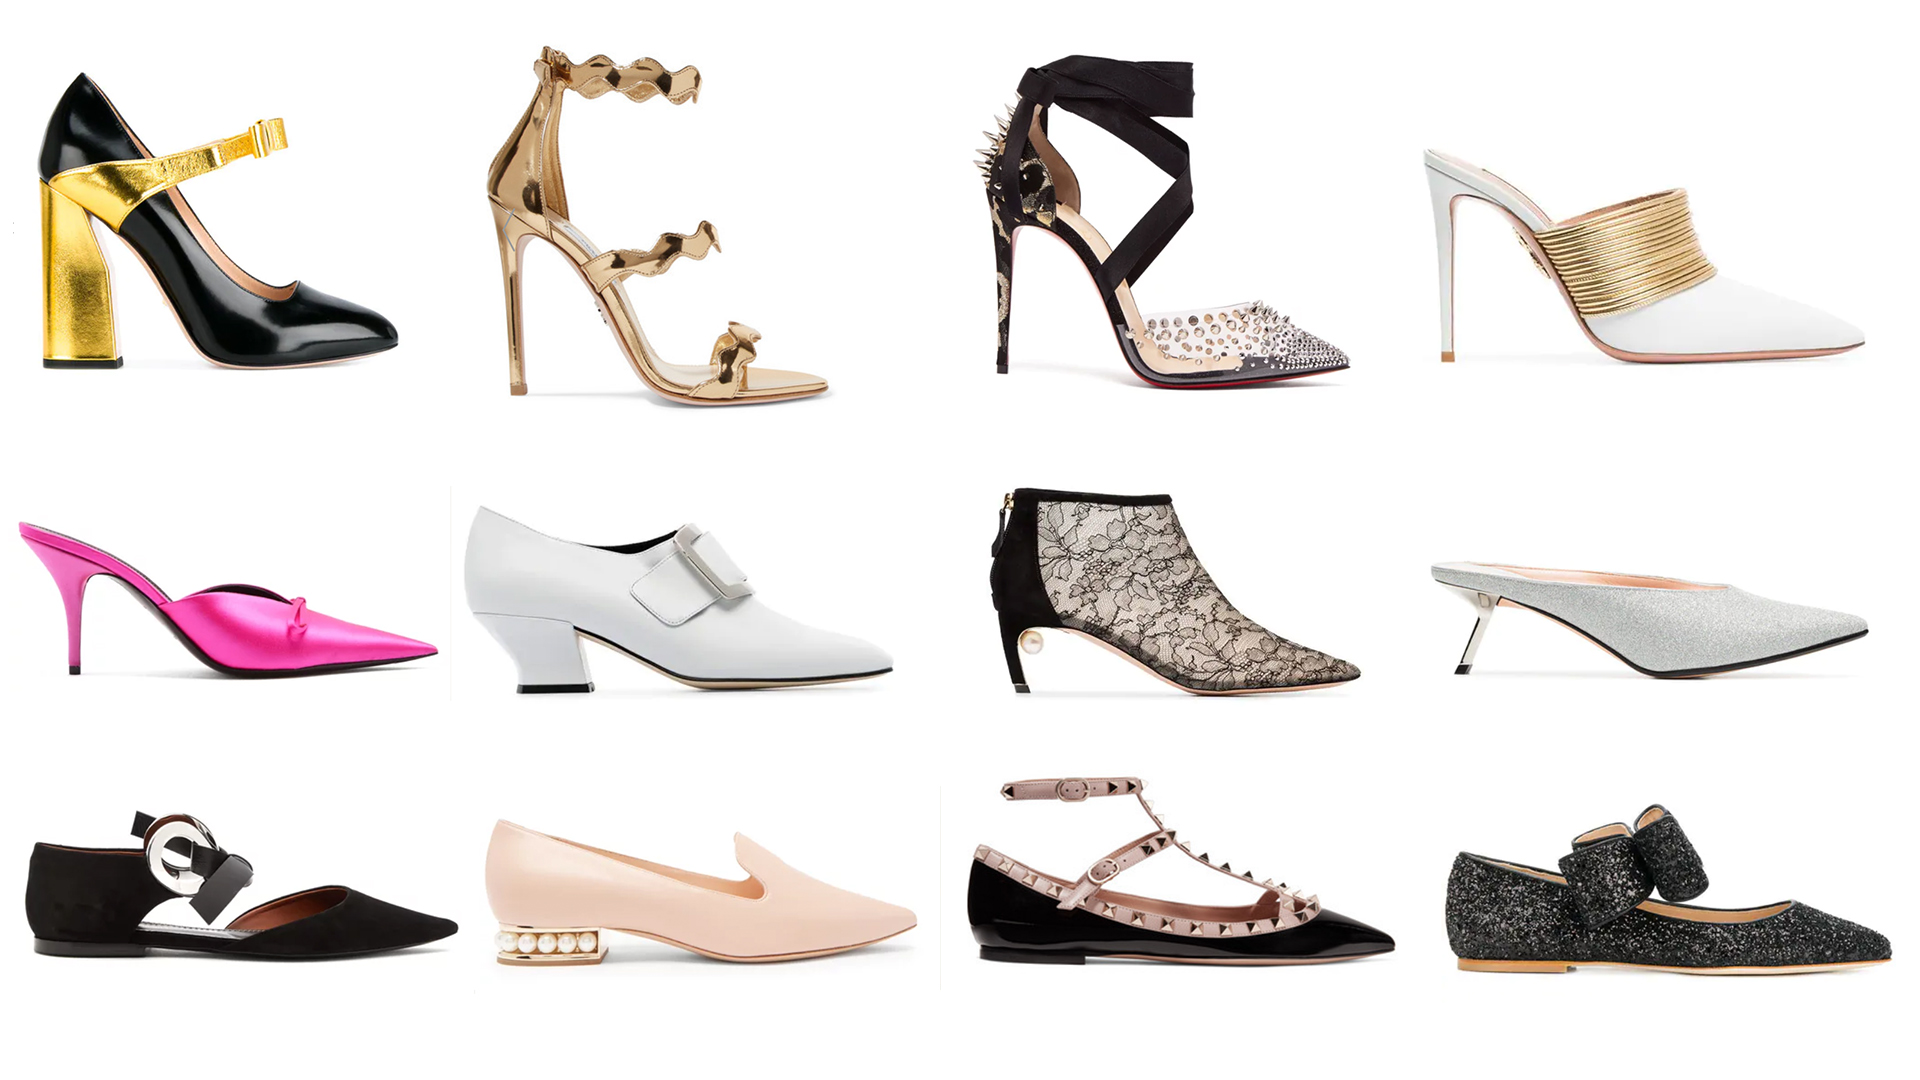 Spring racing shoes at every heel height - Kate Waterhouse